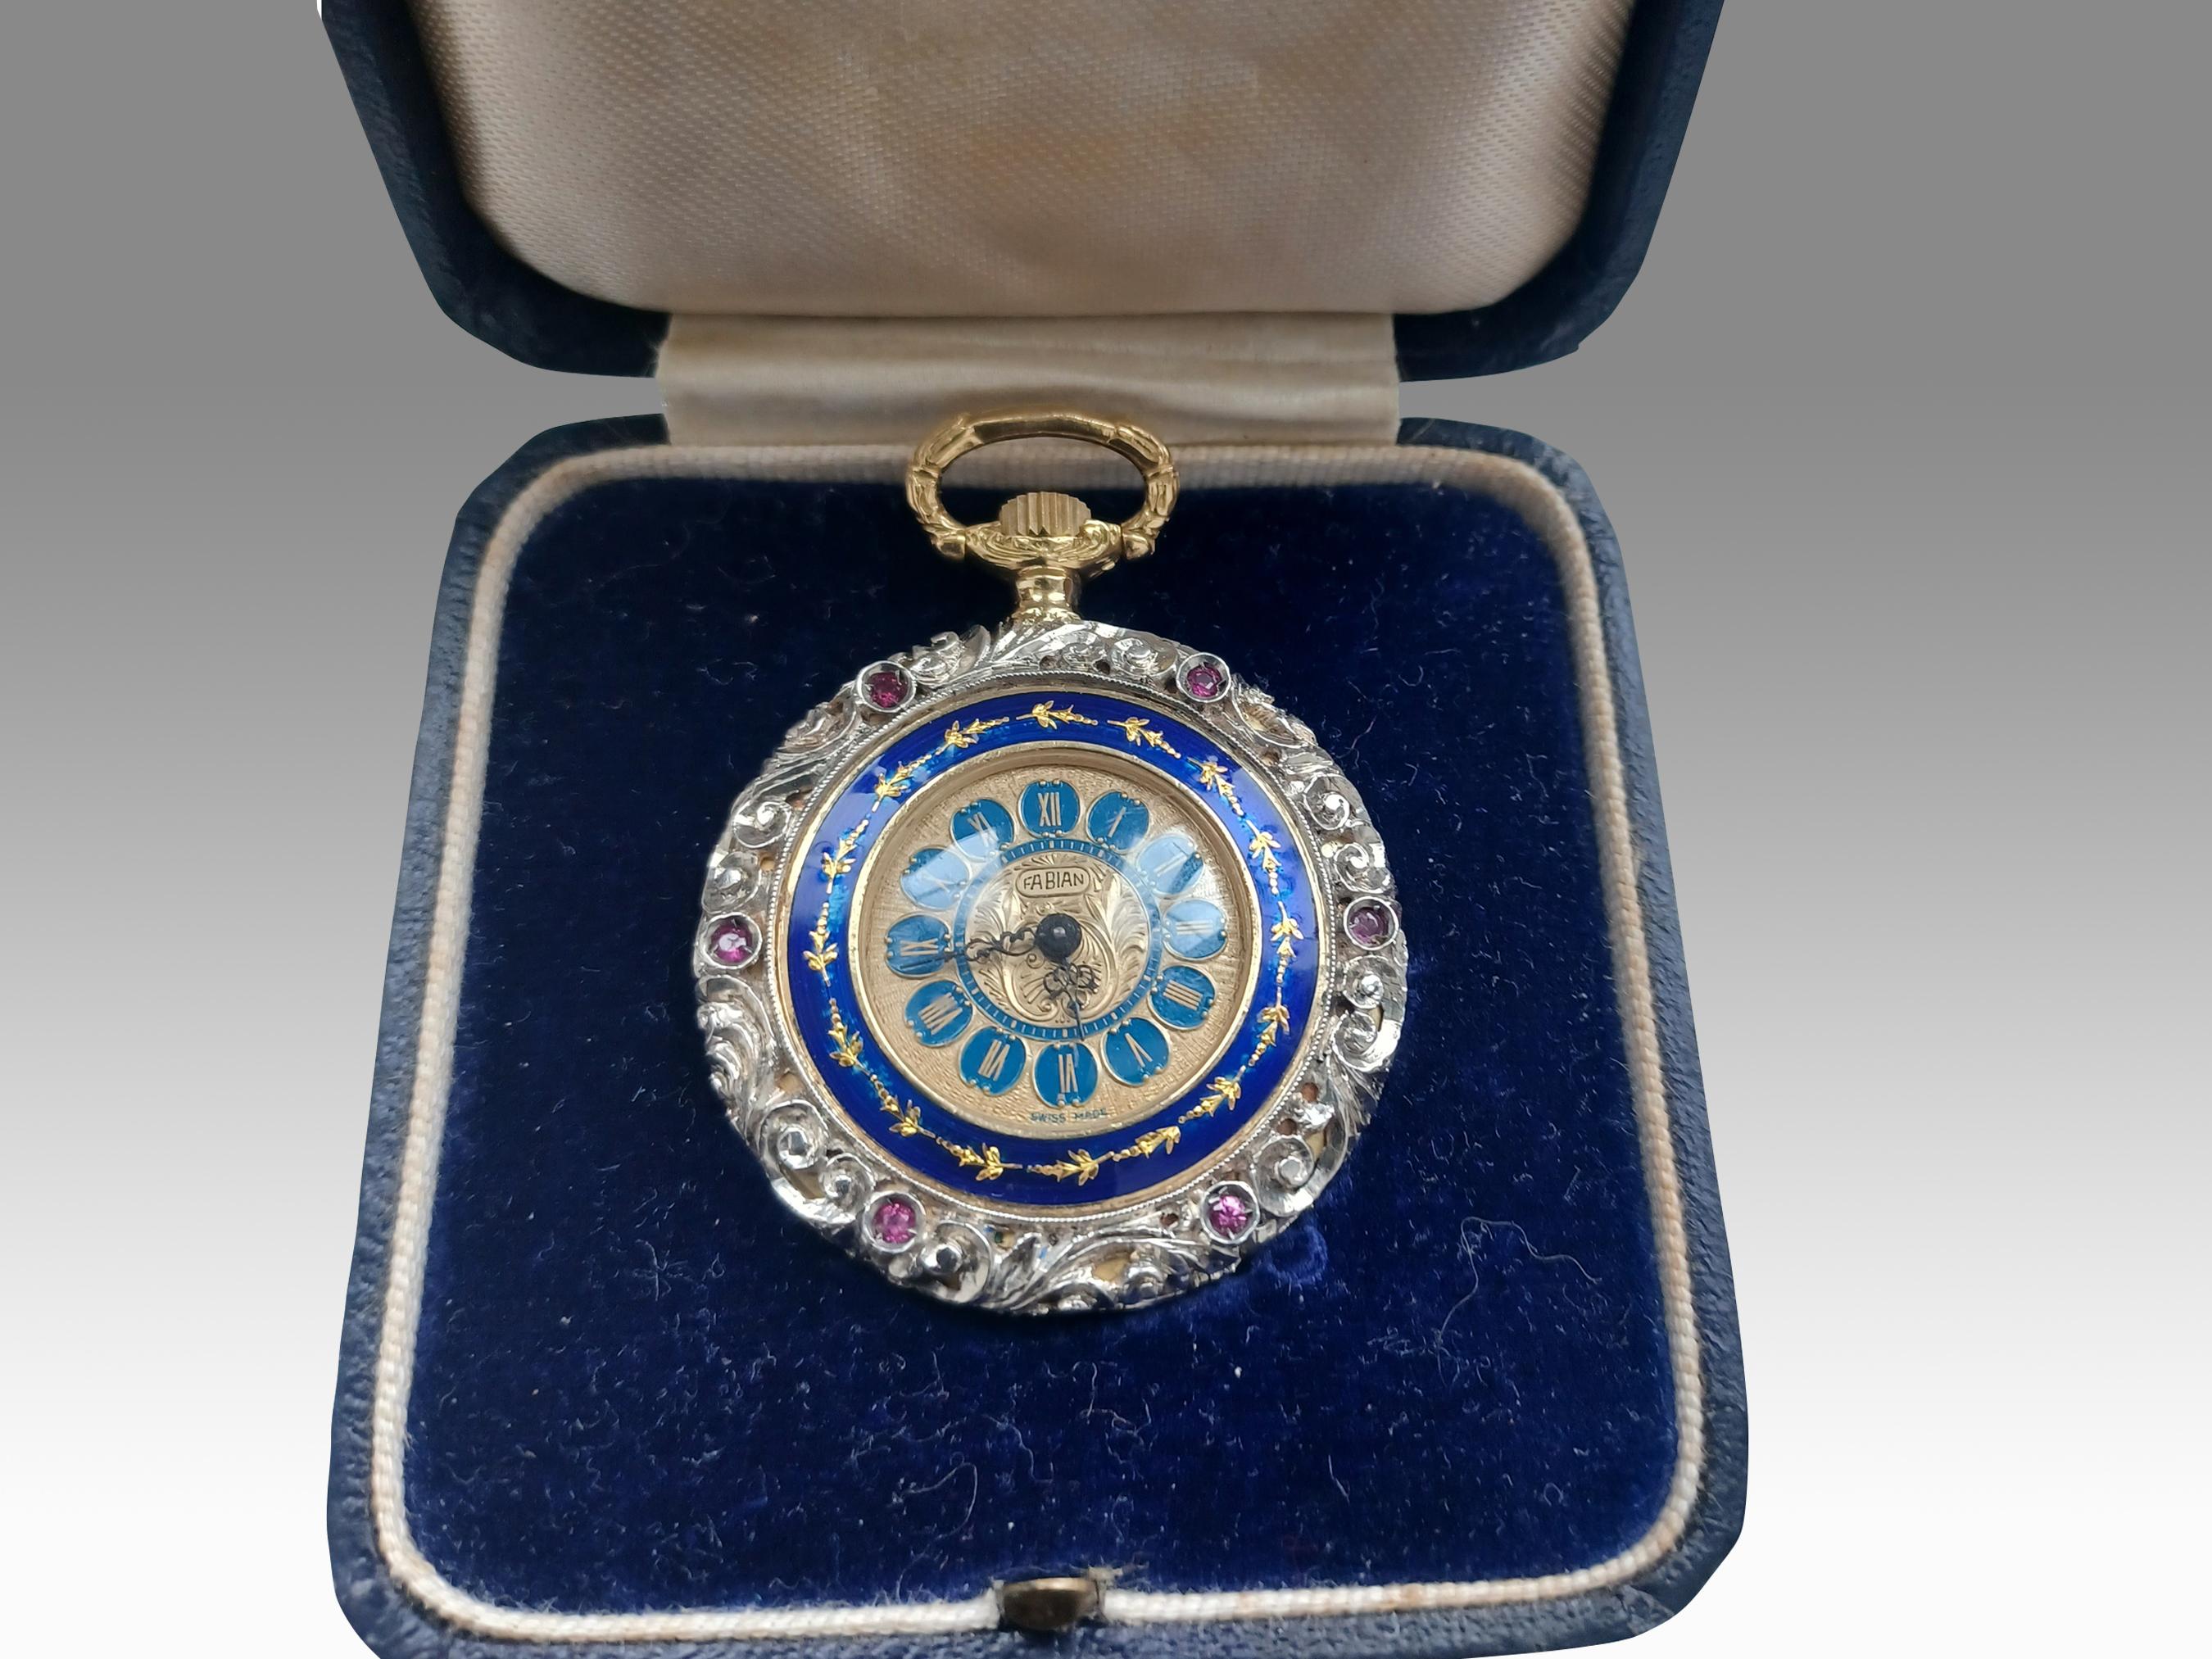 
While the origin of this particularly unique piece remains a mystery, the brilliance and fine craftsmanship are without question. This small 18ct jewellery pocket watch houses elaborate, decorative silver mounting and bezels. There are 6 rubies at